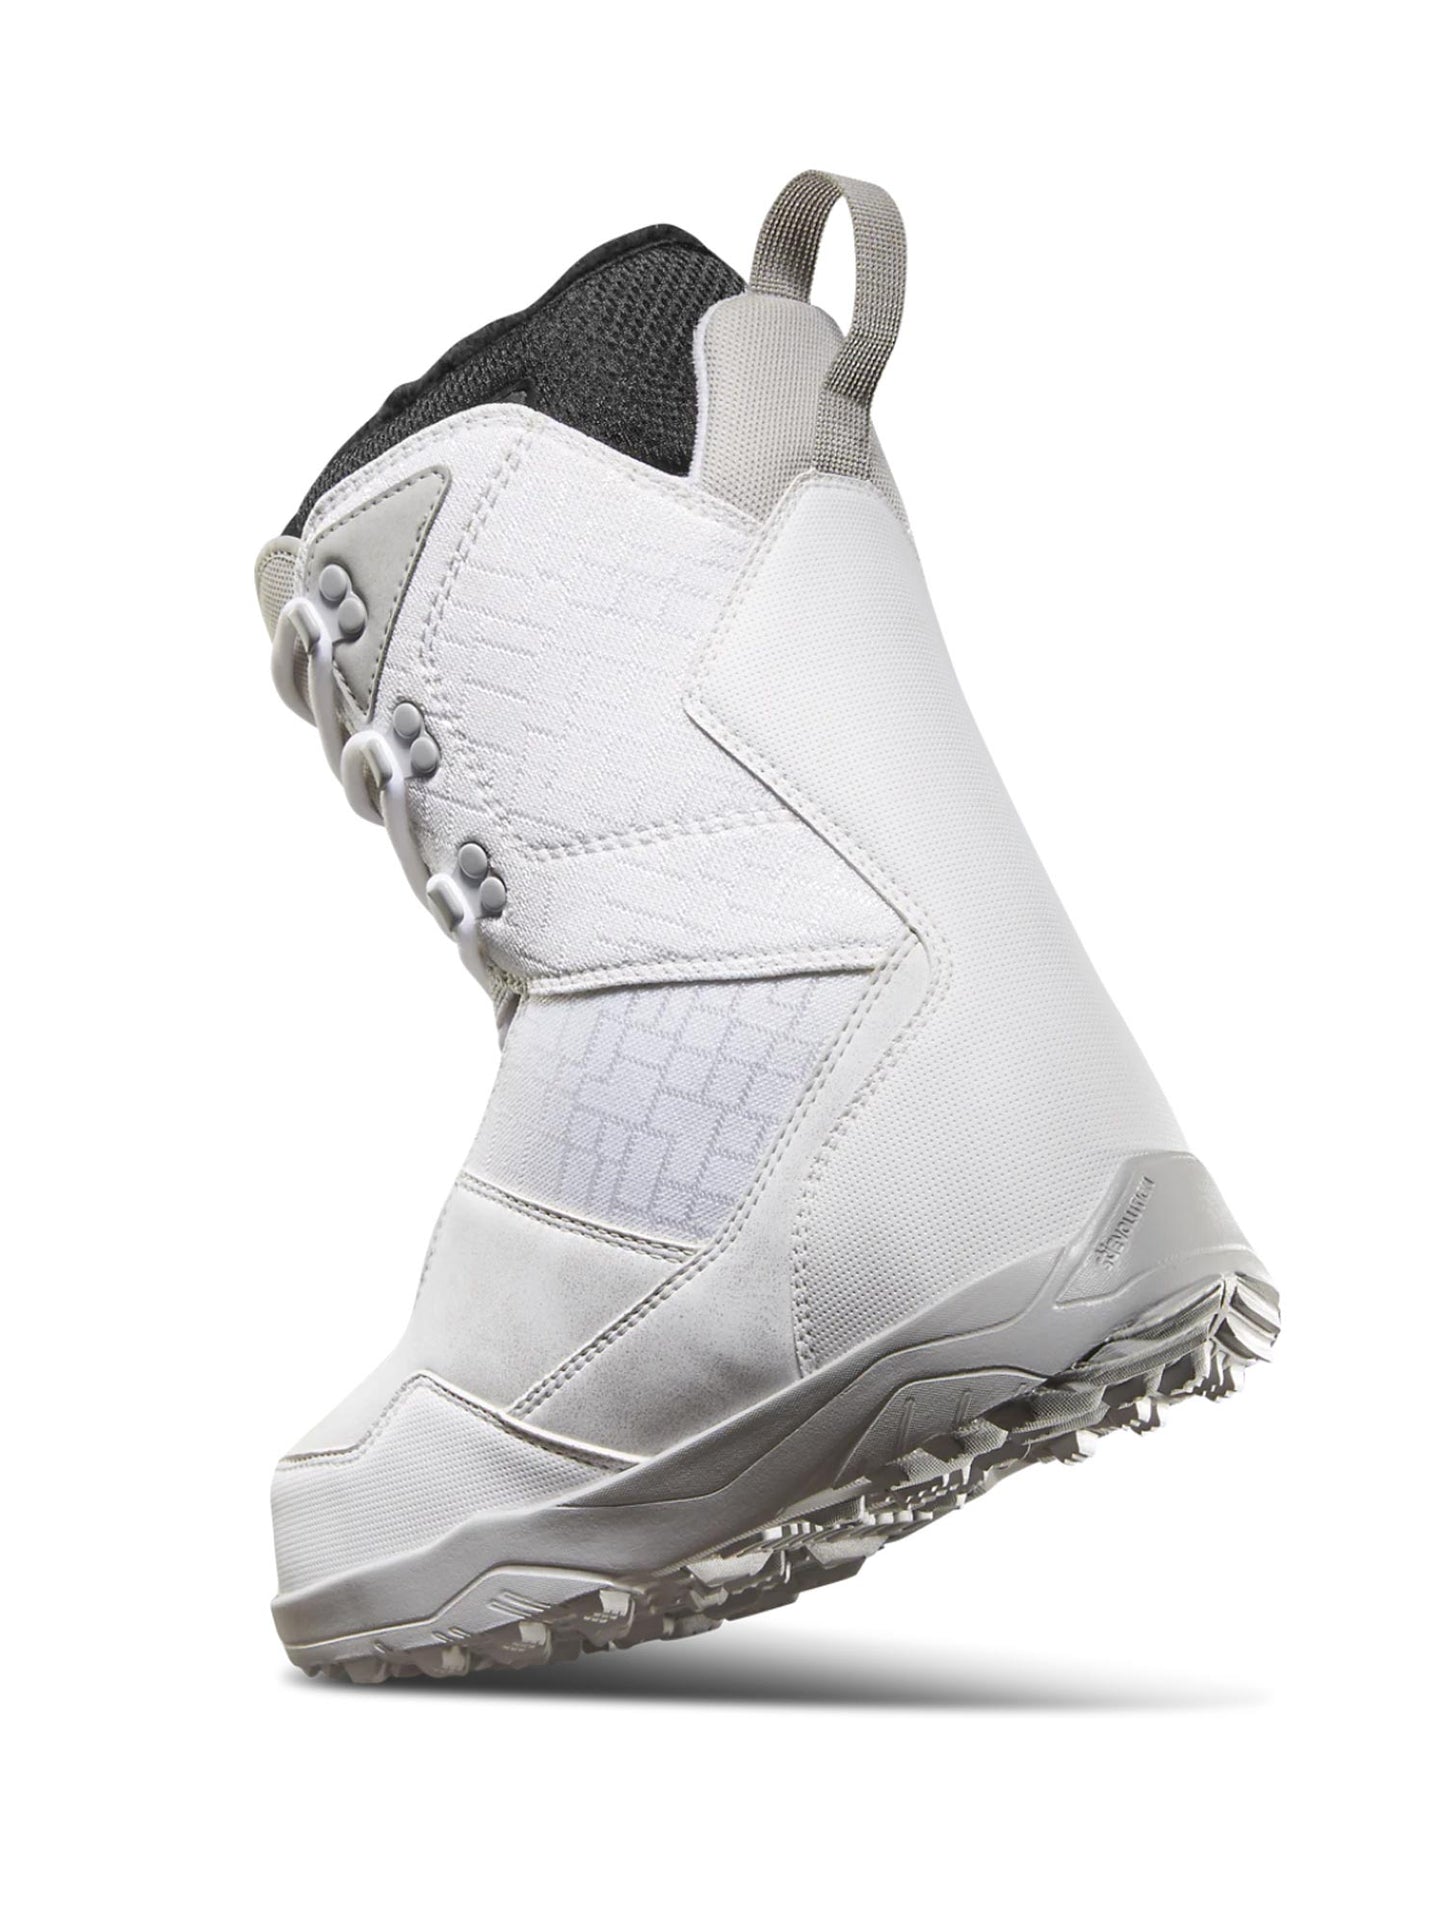 white snowboard boots